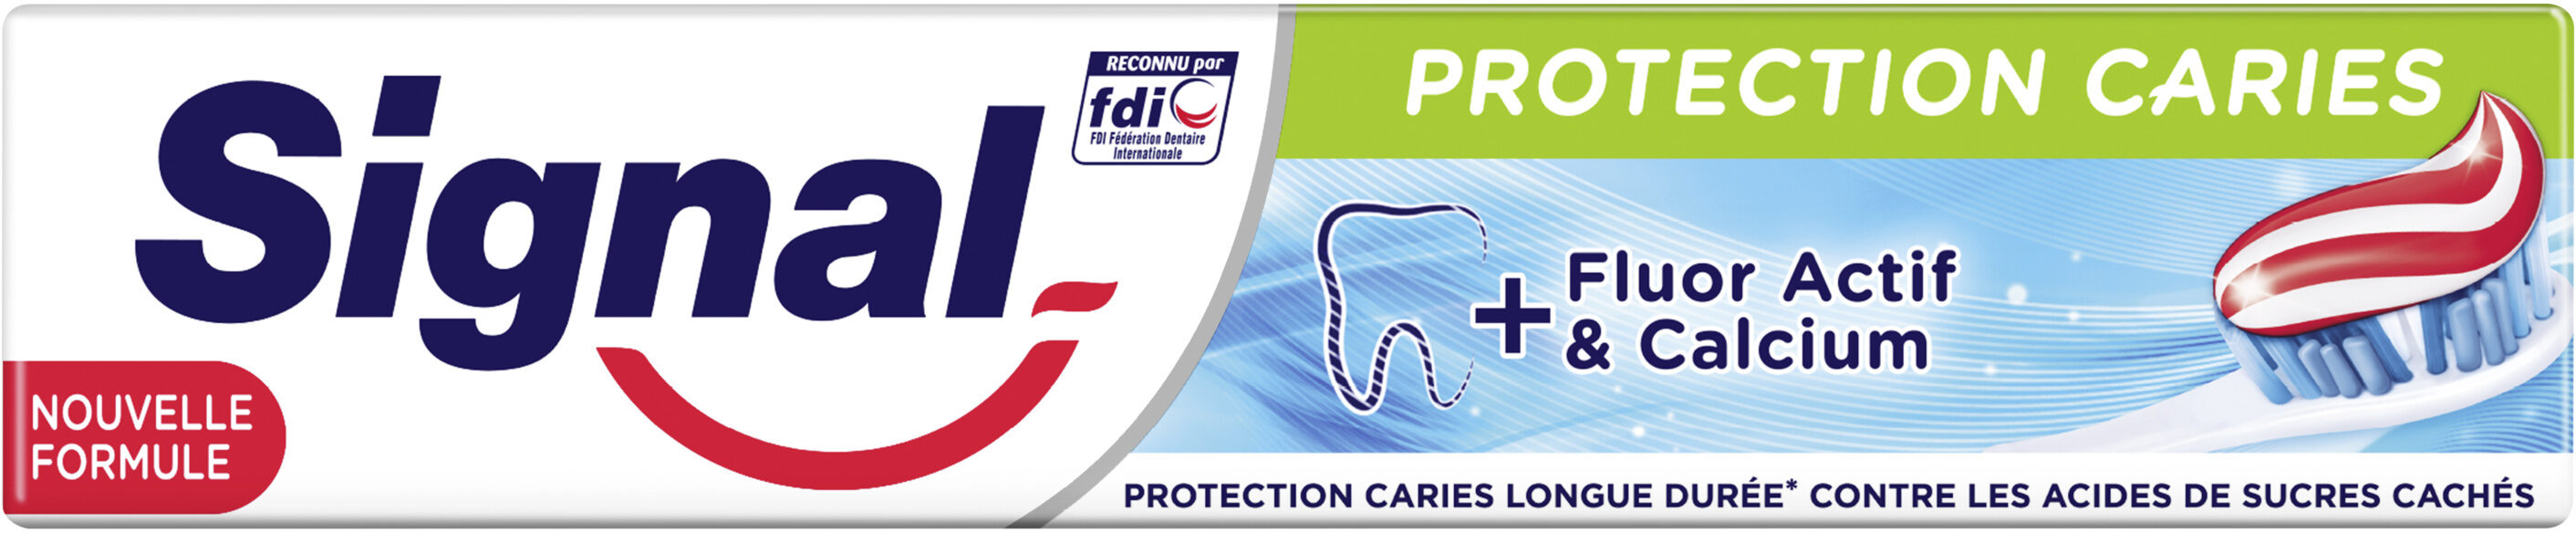 Signal Dentifrice Protection Caries 75ml - Product - fr